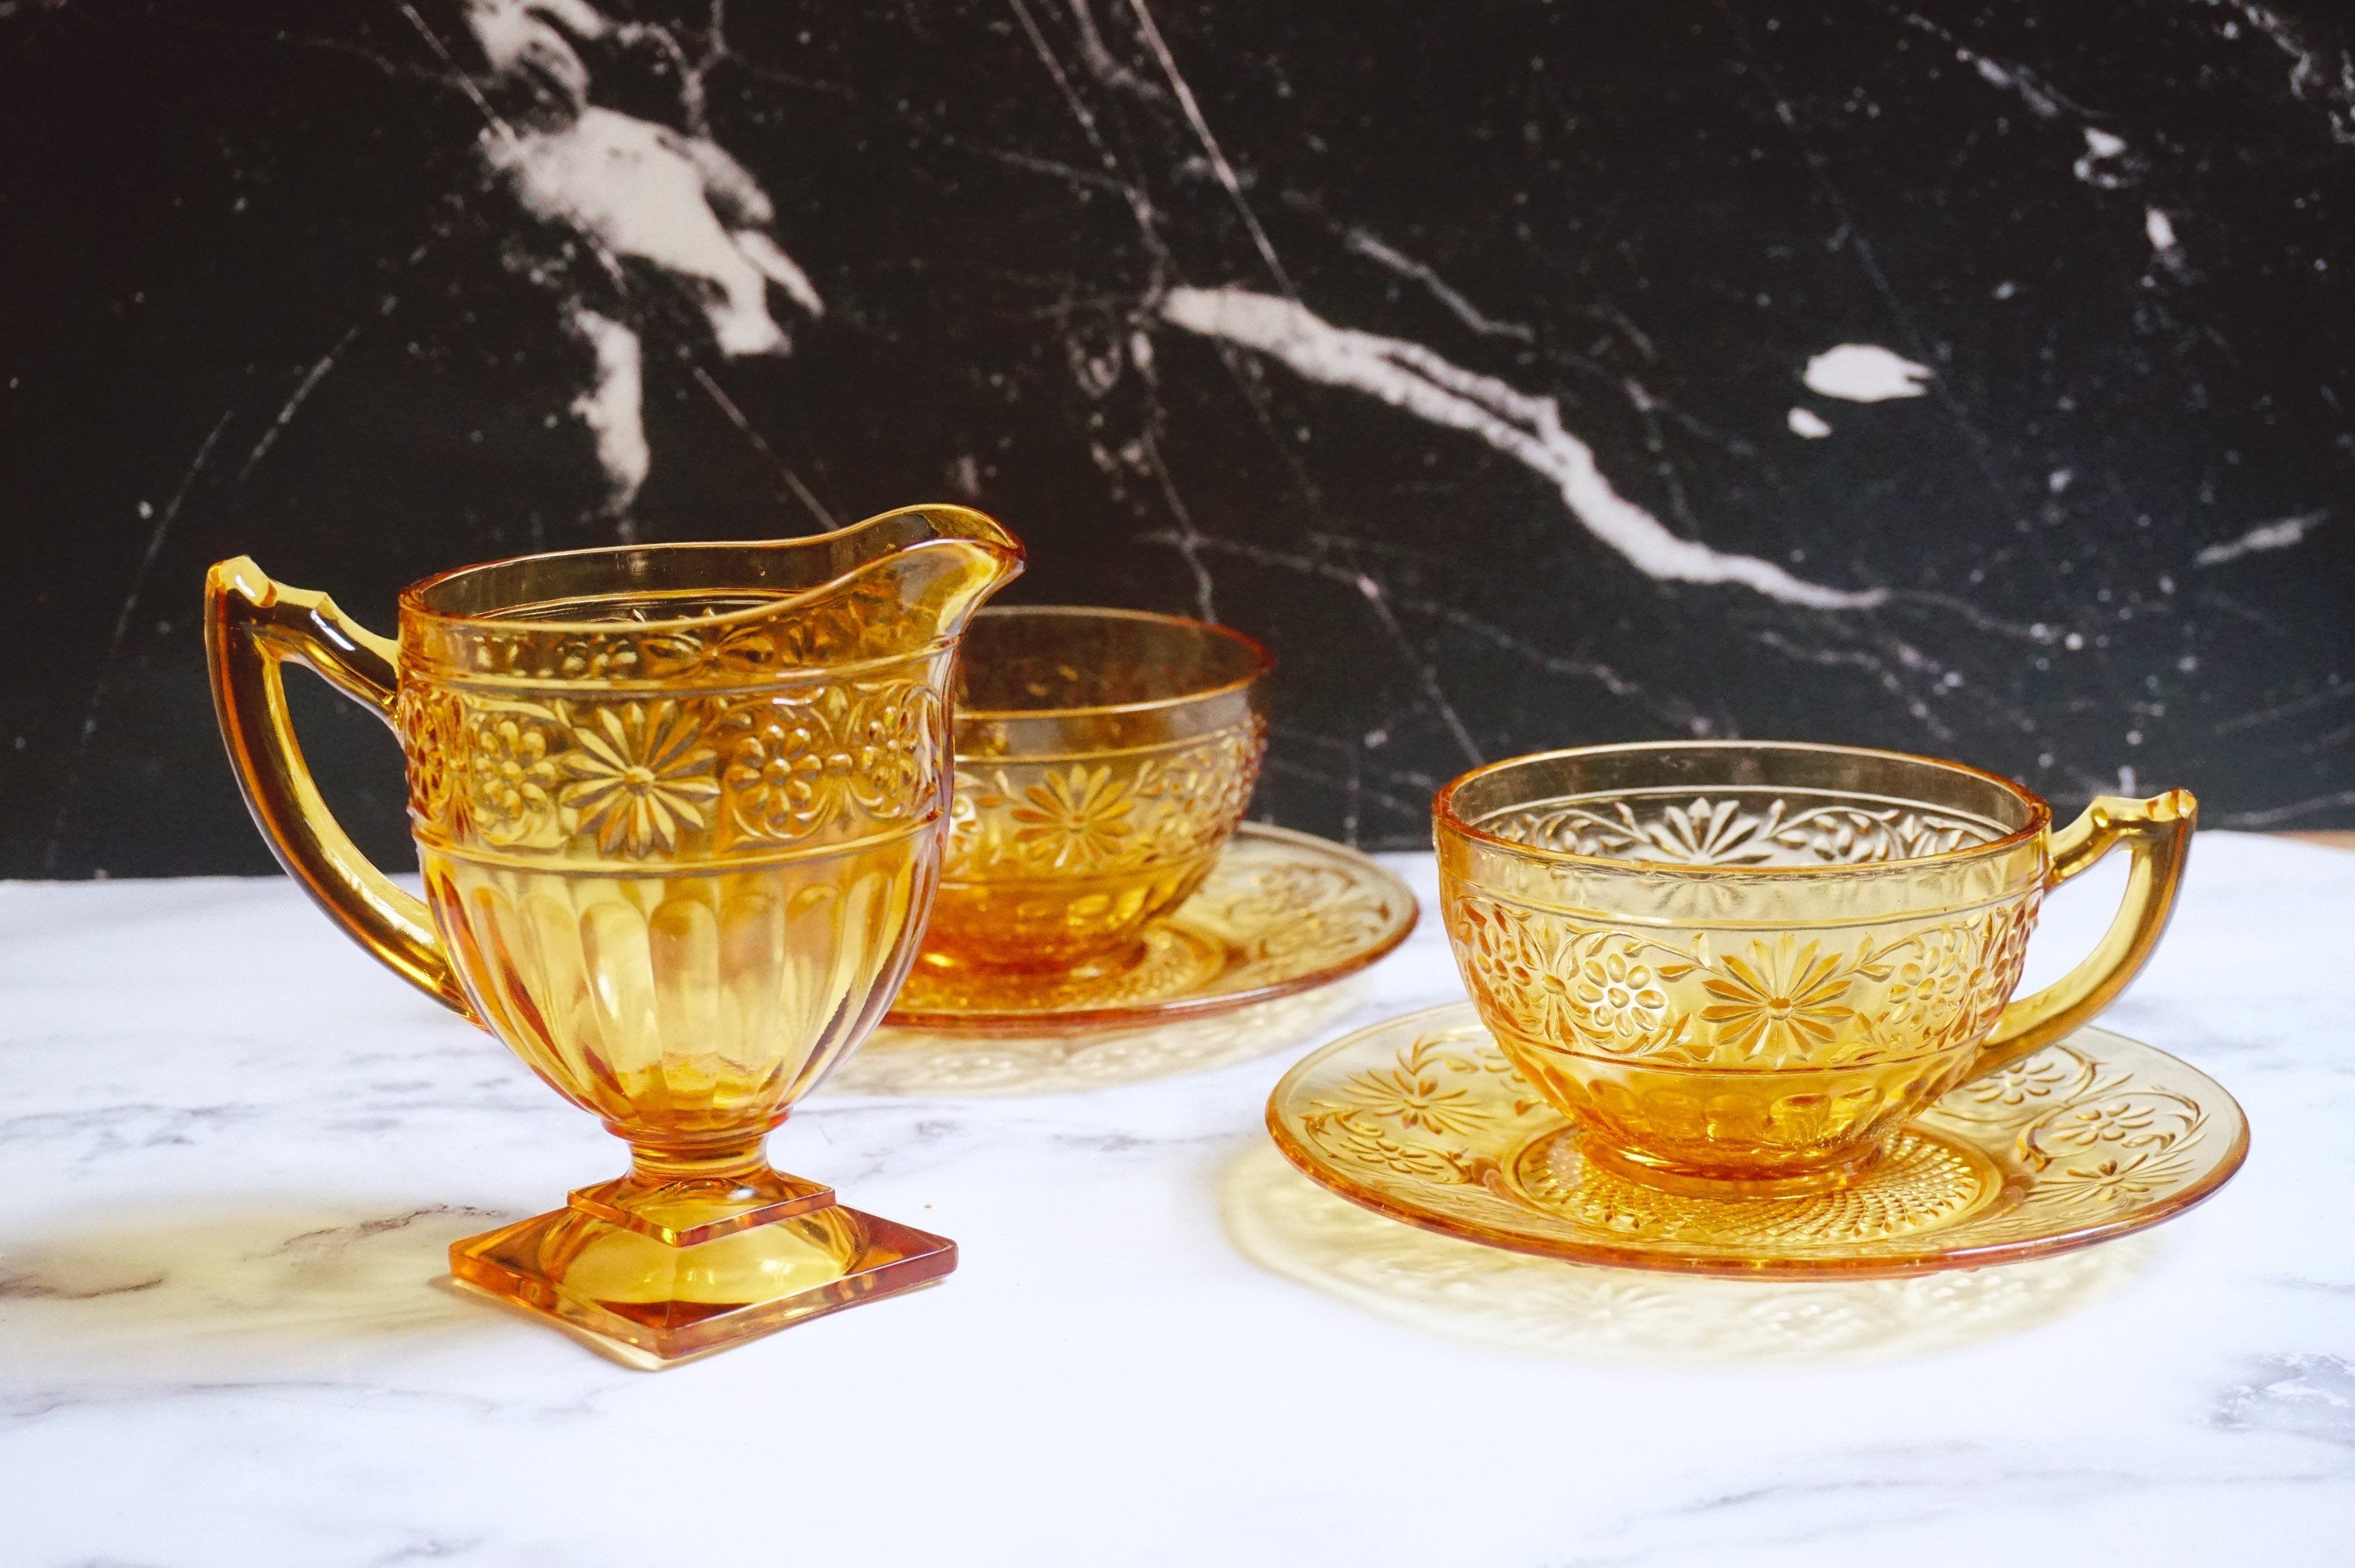 Vintage Amber Depression Glass Set In Daisy Pattern | Cup, Plate, Bowl, Creamer, Goblet, Serving Dish by Indiana Glass